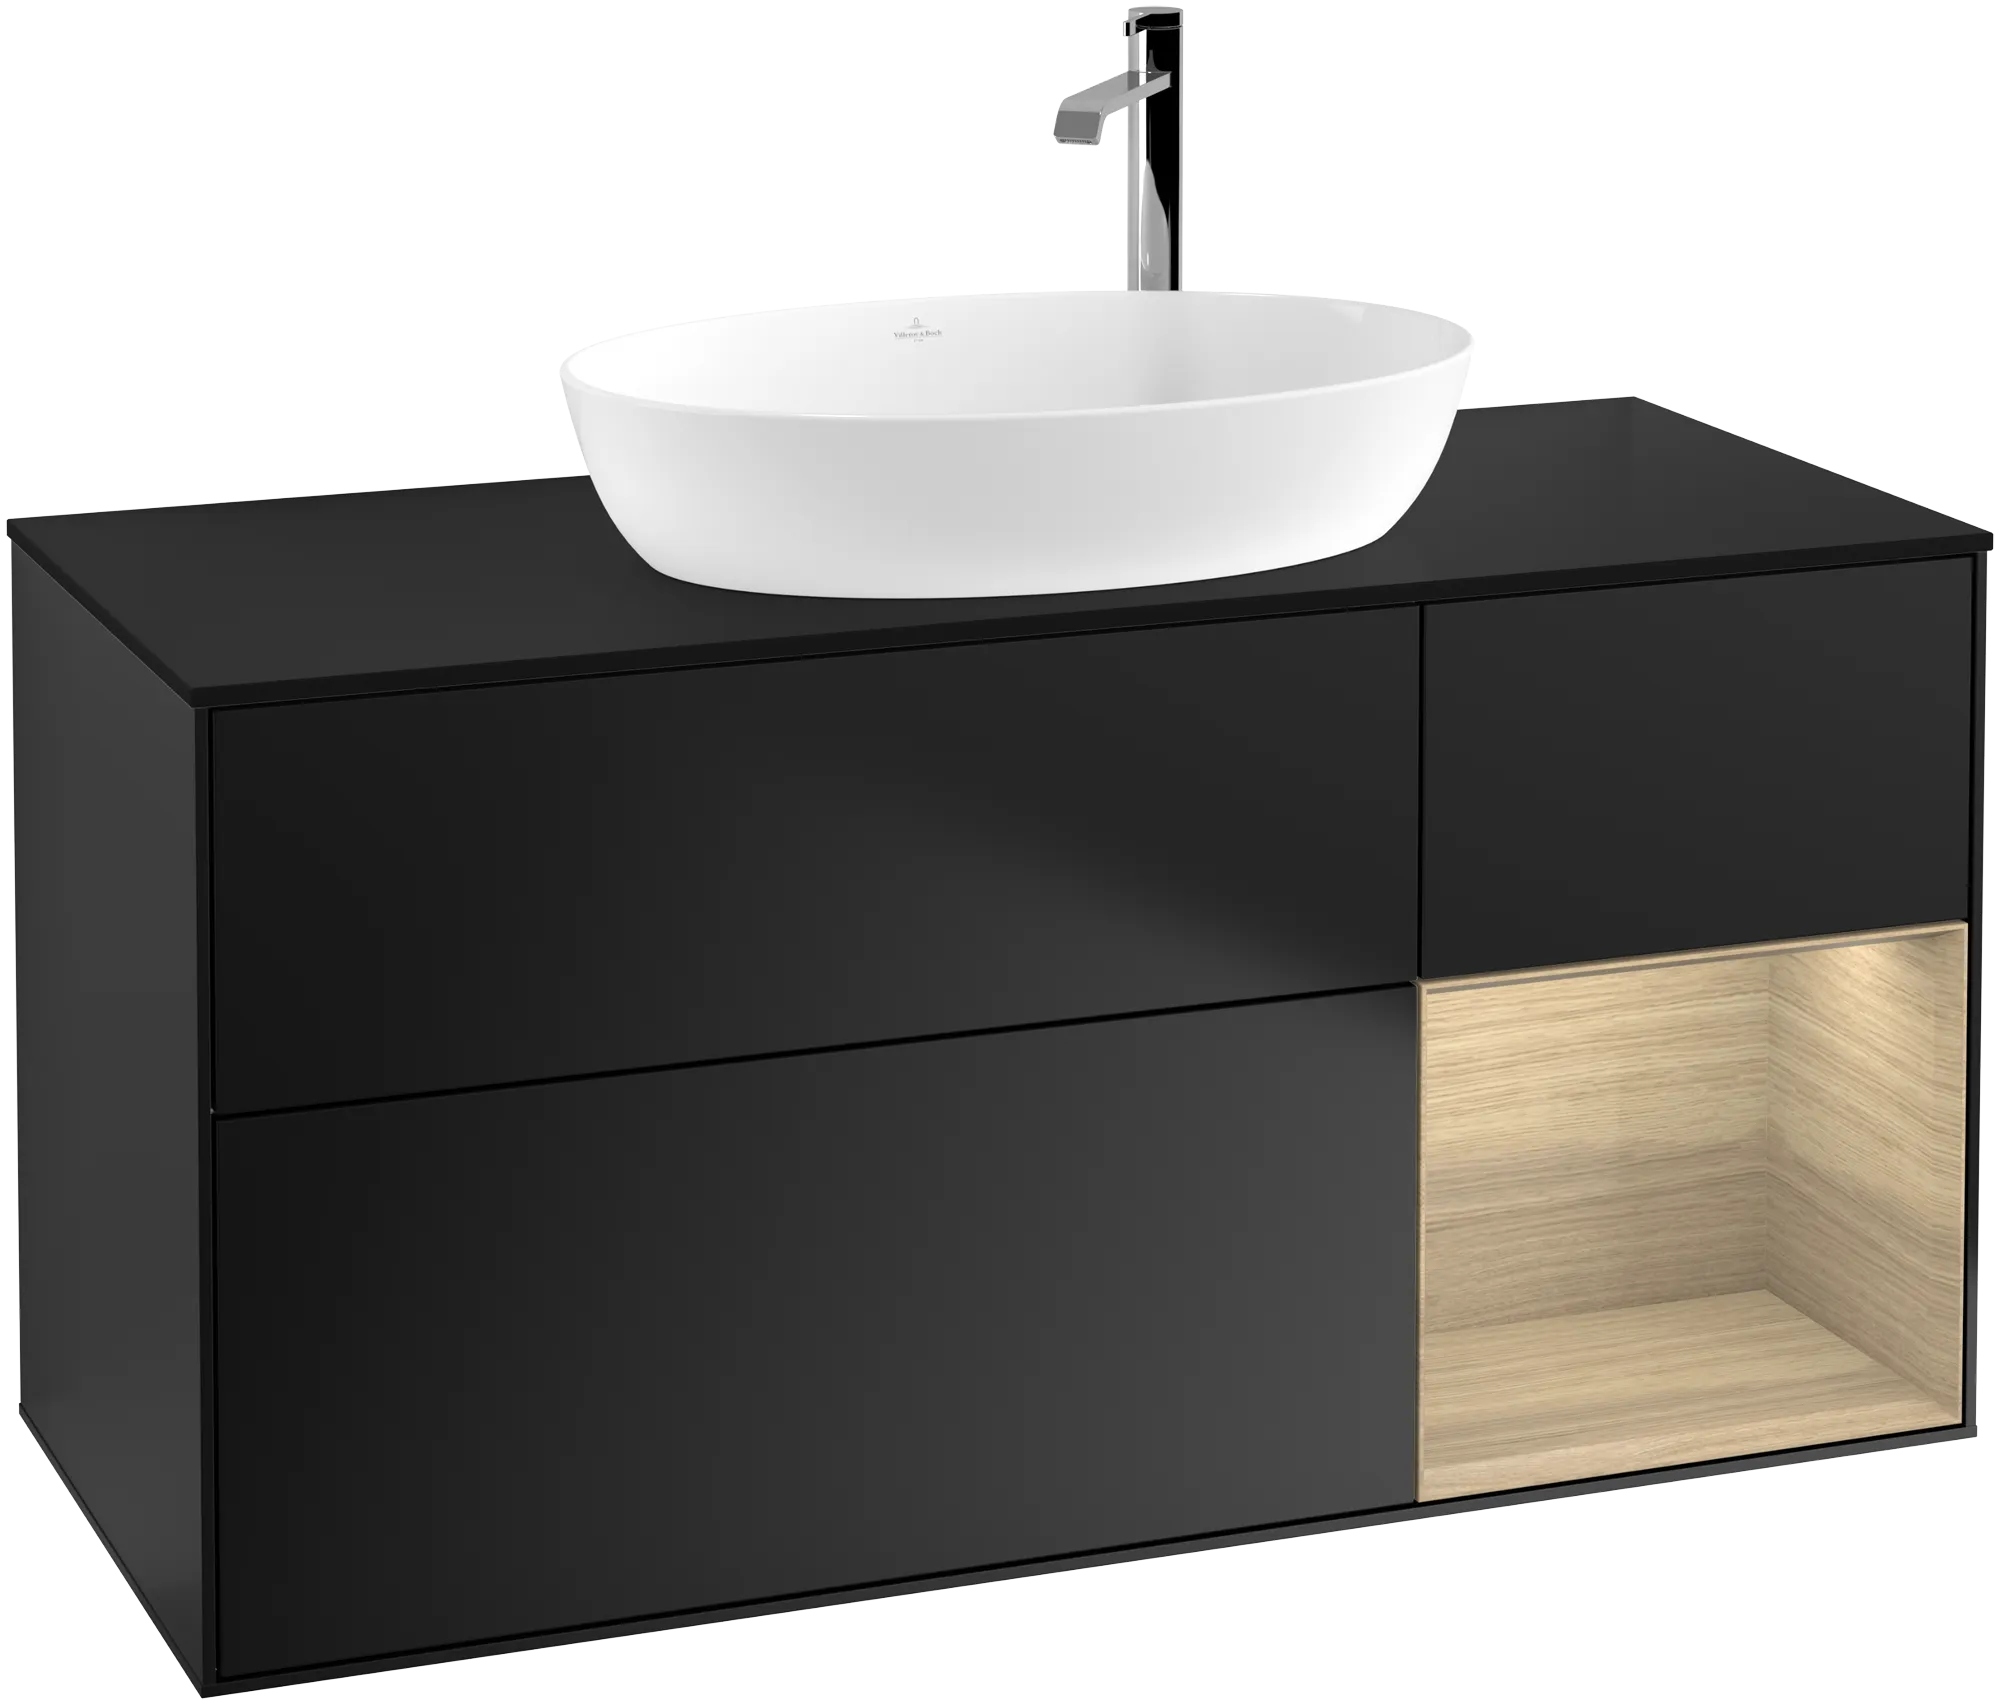 Picture of VILLEROY BOCH Finion Vanity unit, with lighting, 3 pull-out compartments, 1200 x 603 x 501 mm, Black Matt Lacquer / Oak Veneer / Glass Black Matt #G952PCPD